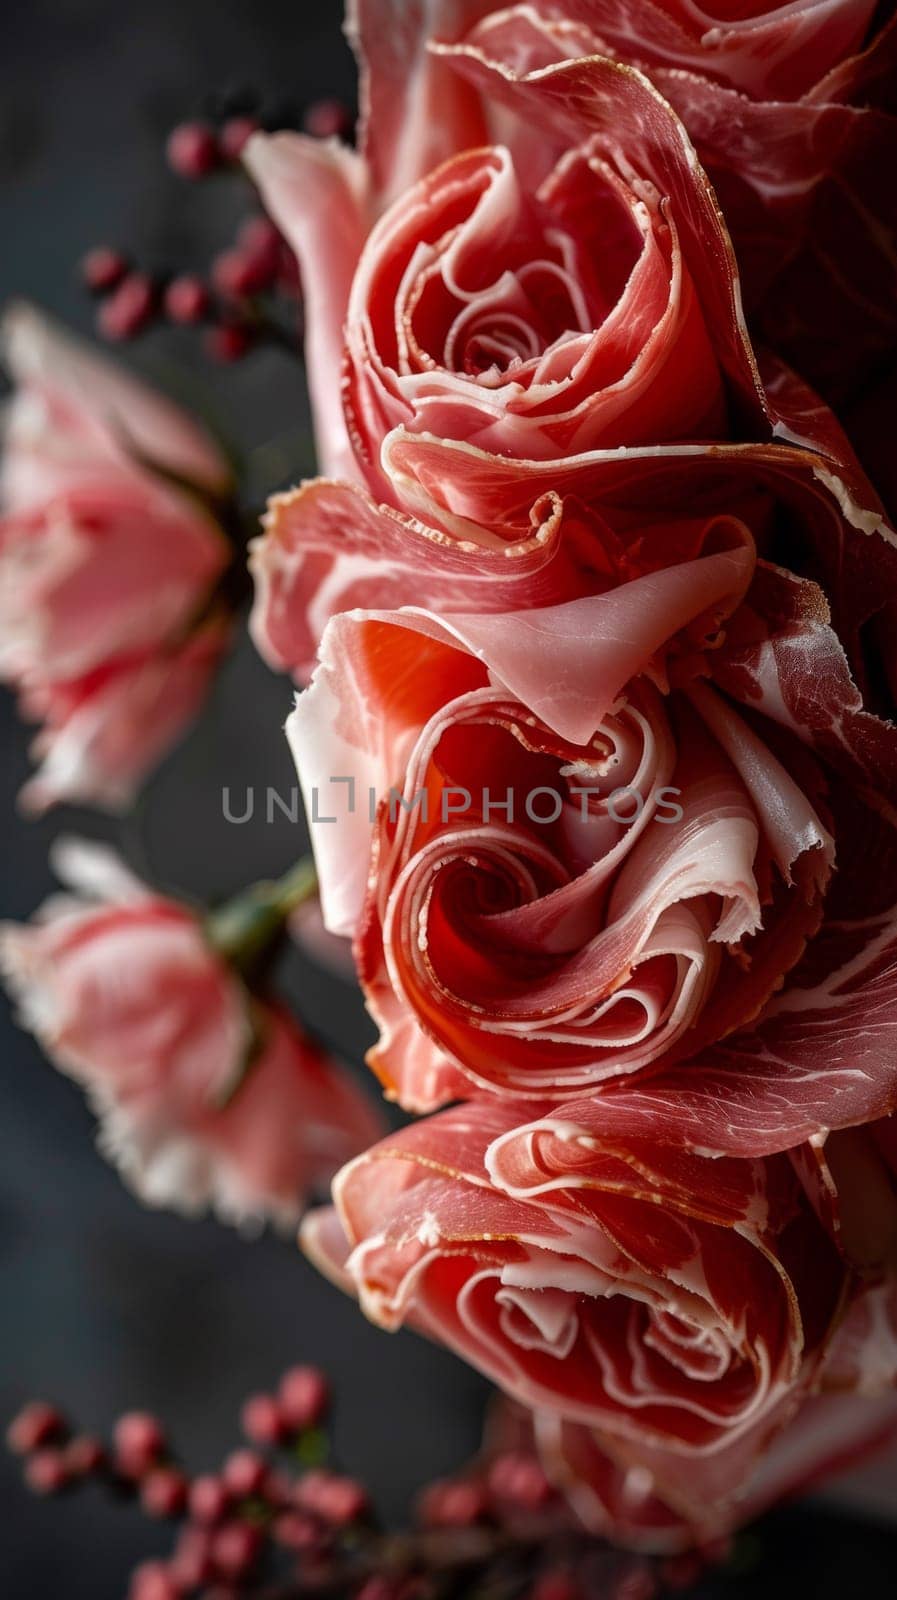 A close up of a bunch of roses with pink petals